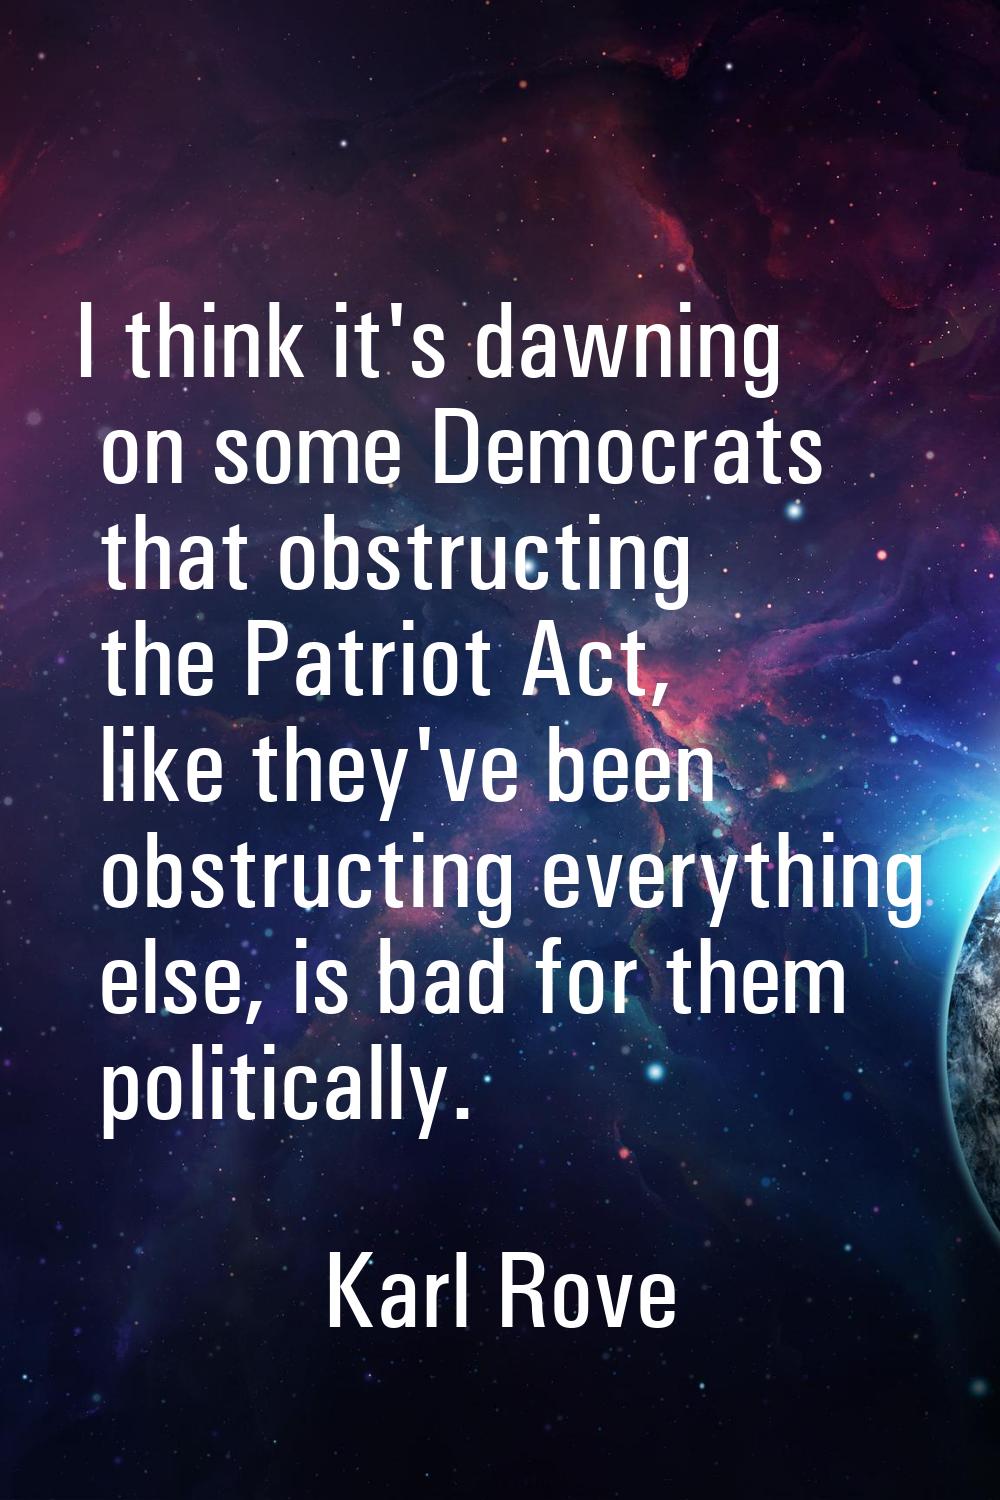 I think it's dawning on some Democrats that obstructing the Patriot Act, like they've been obstruct